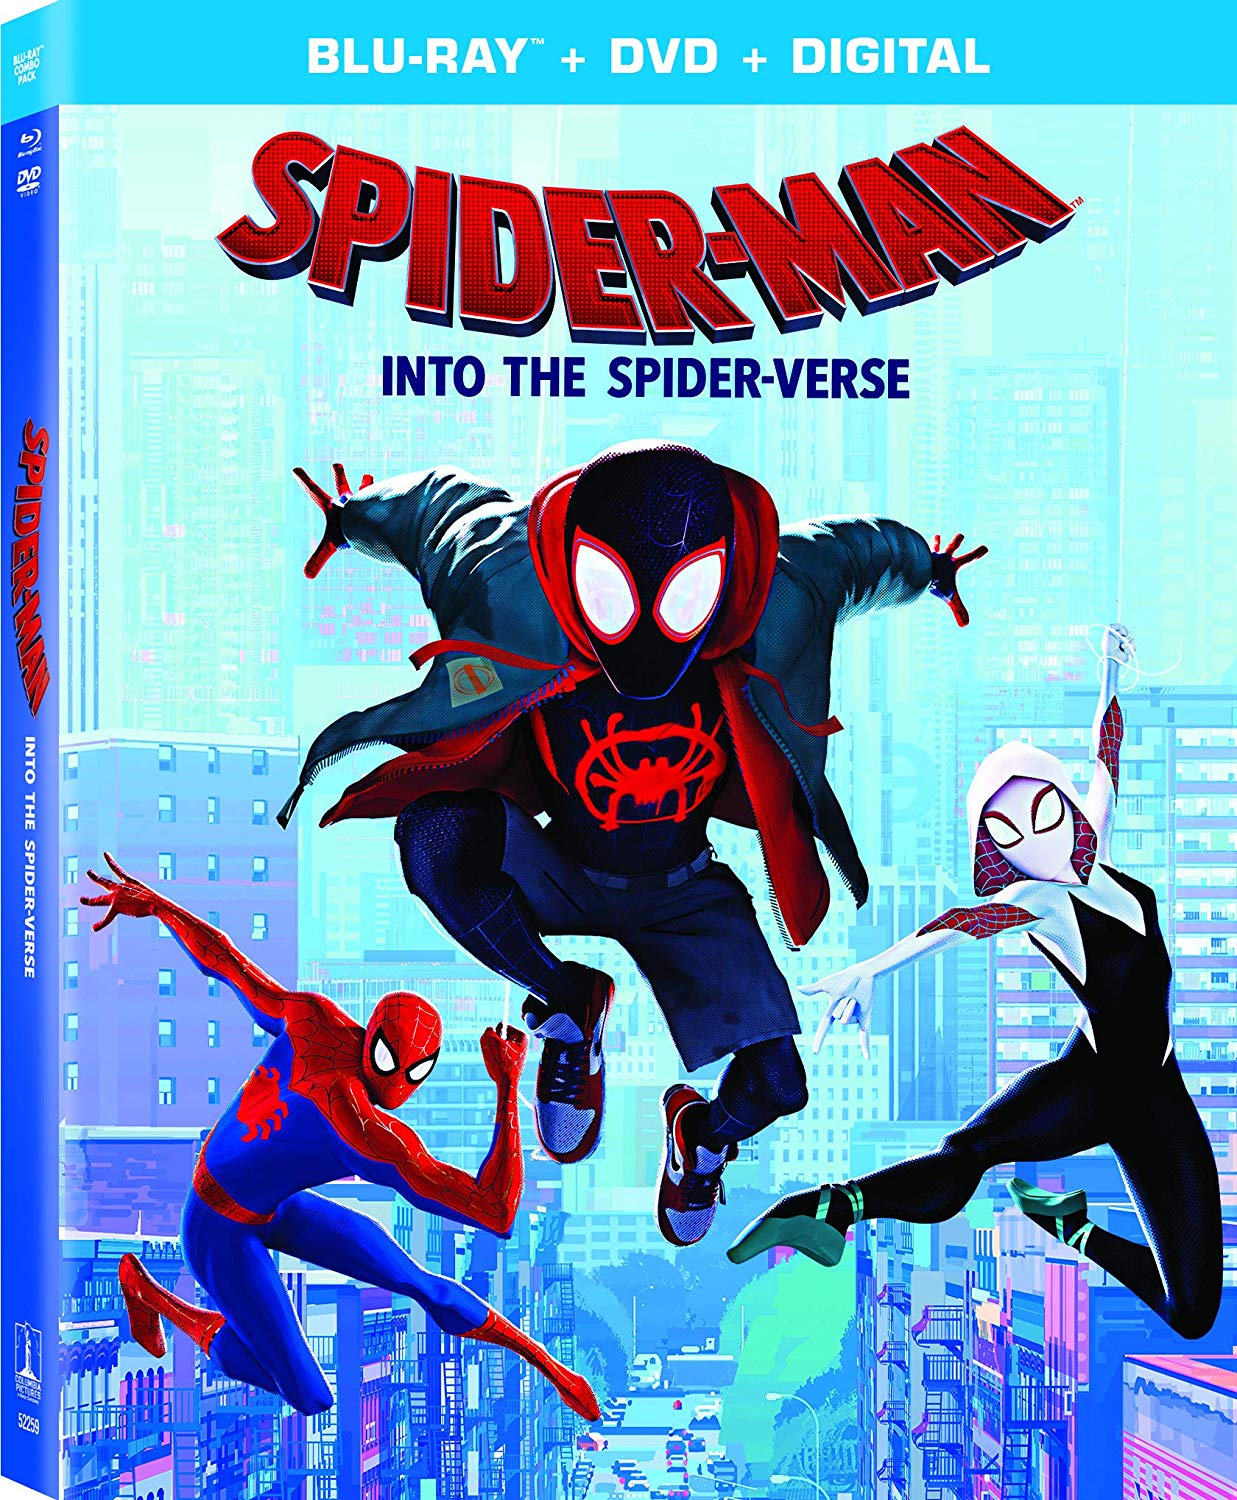 Spider-Man Into the Spider-Verse on Blu-ray